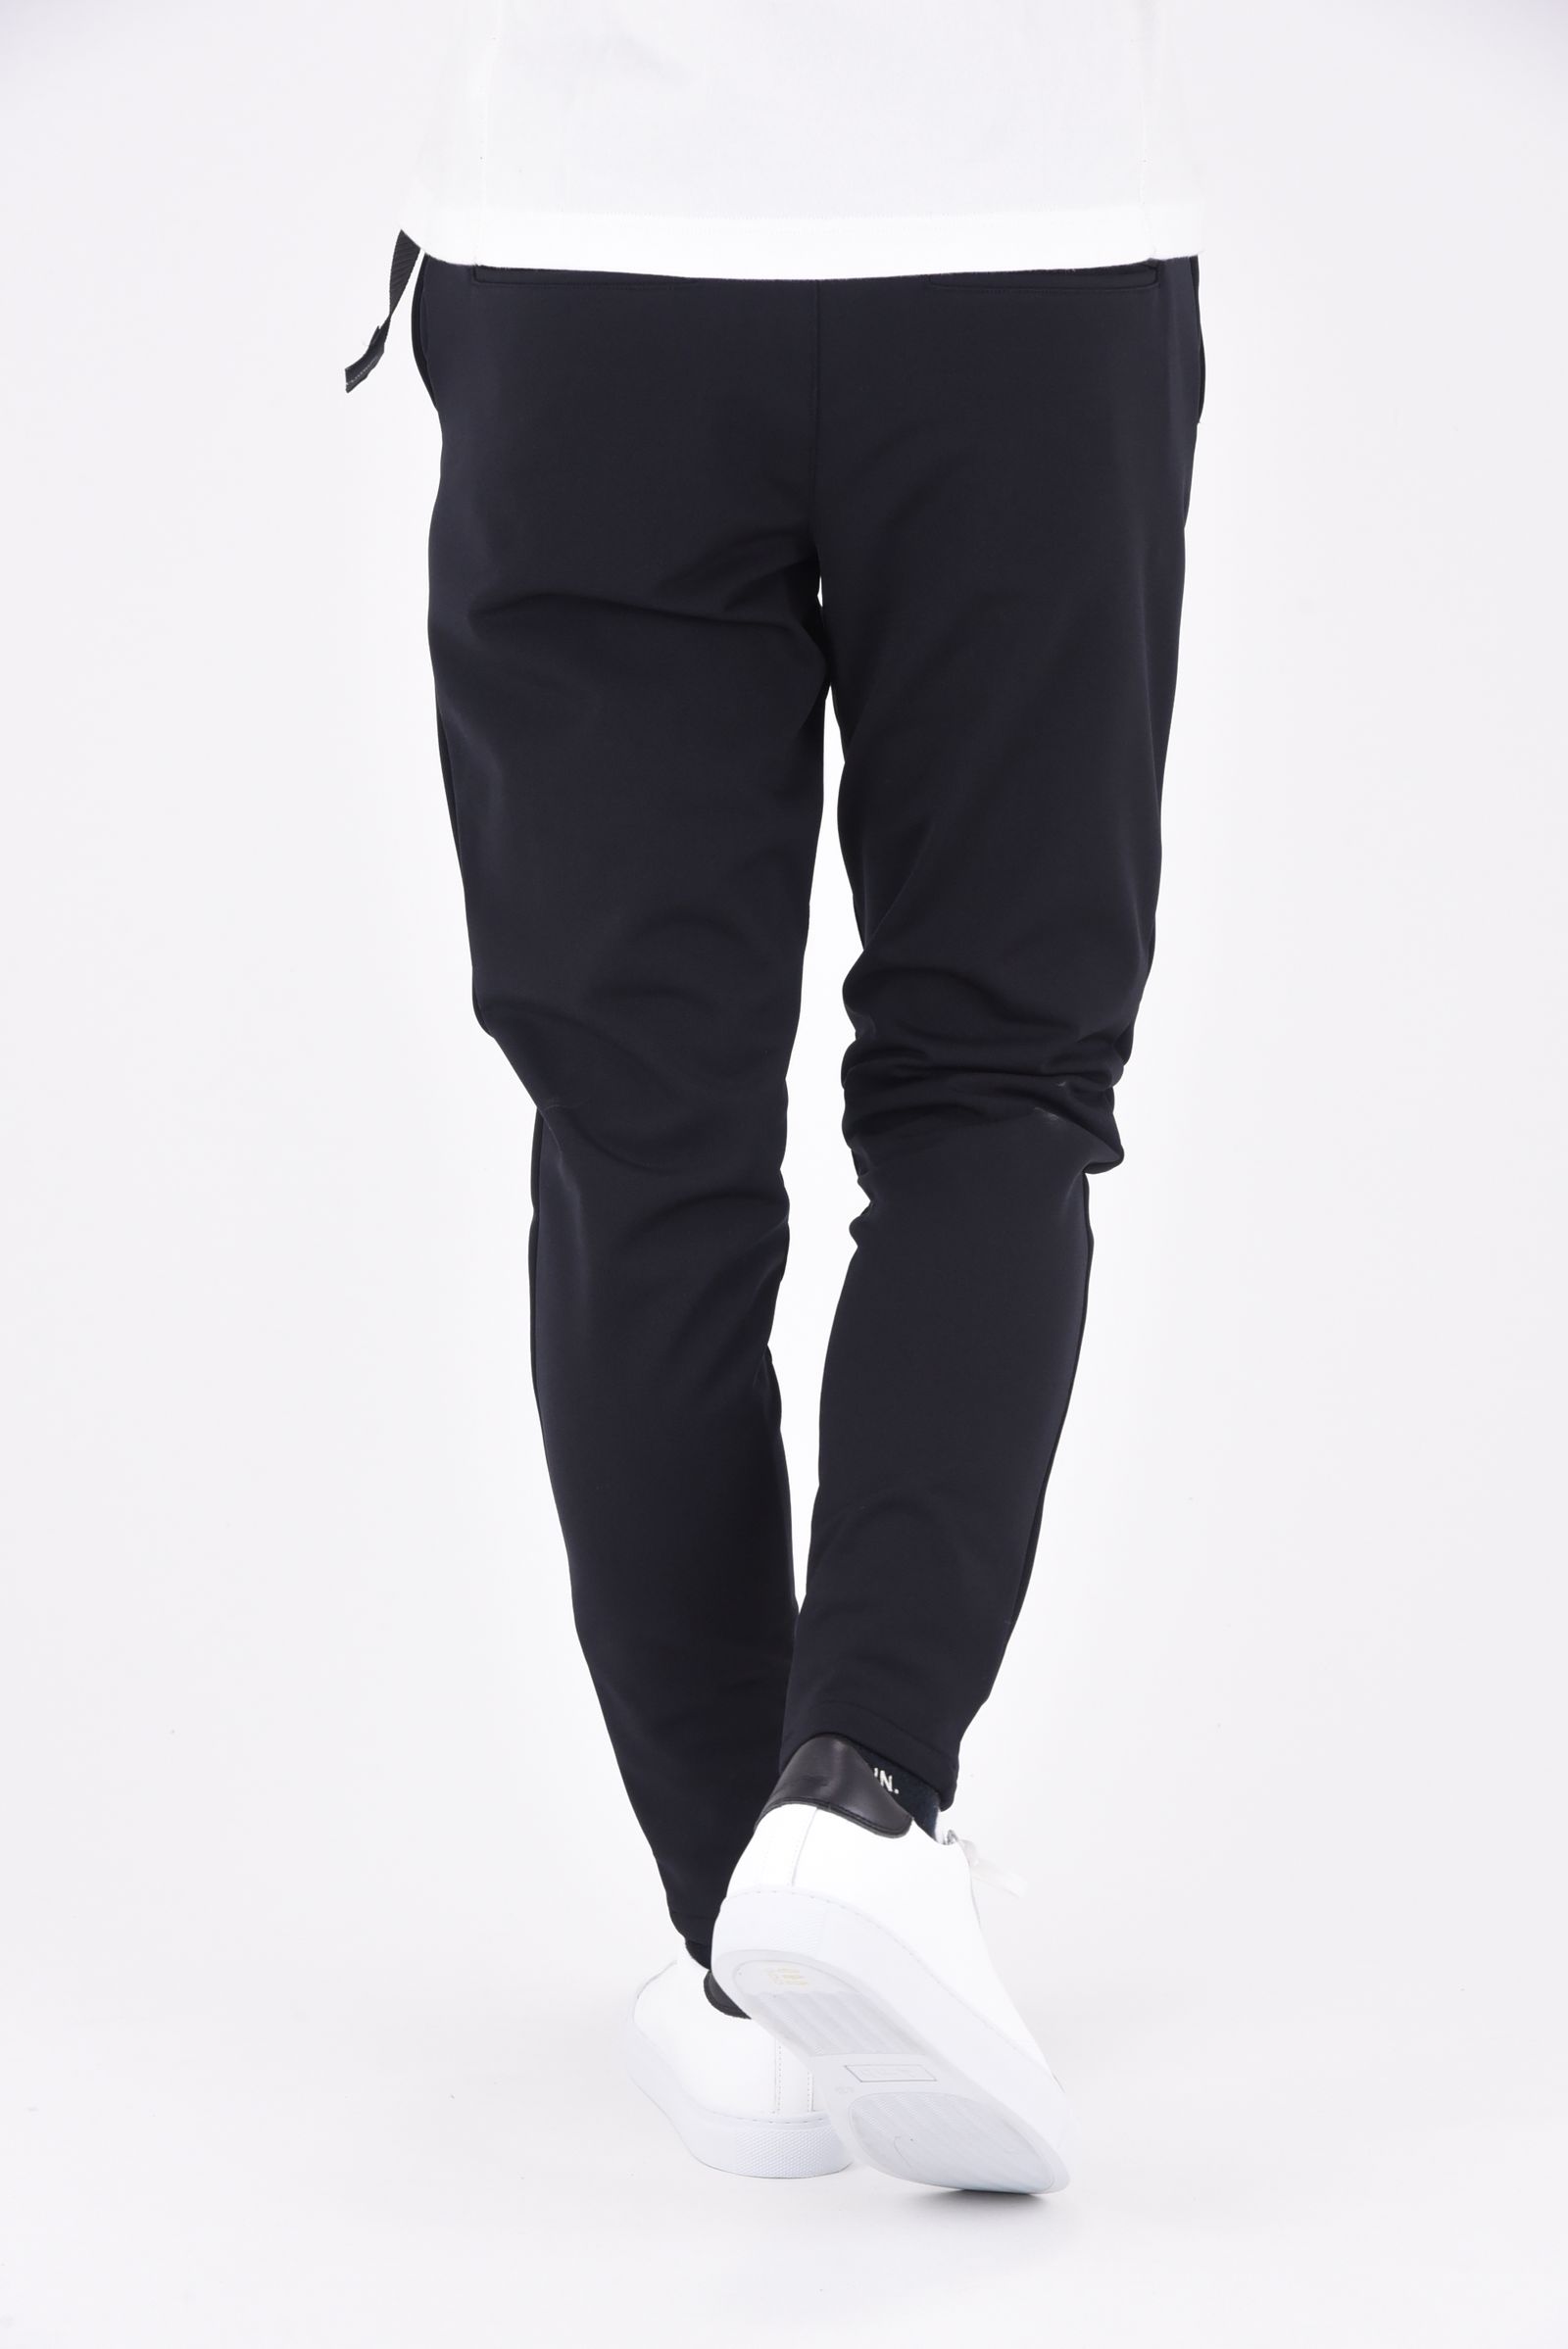 RESOUND CLOTHING - PAT TIGHT EASY PANTS / ストレッチツイル 裏起毛